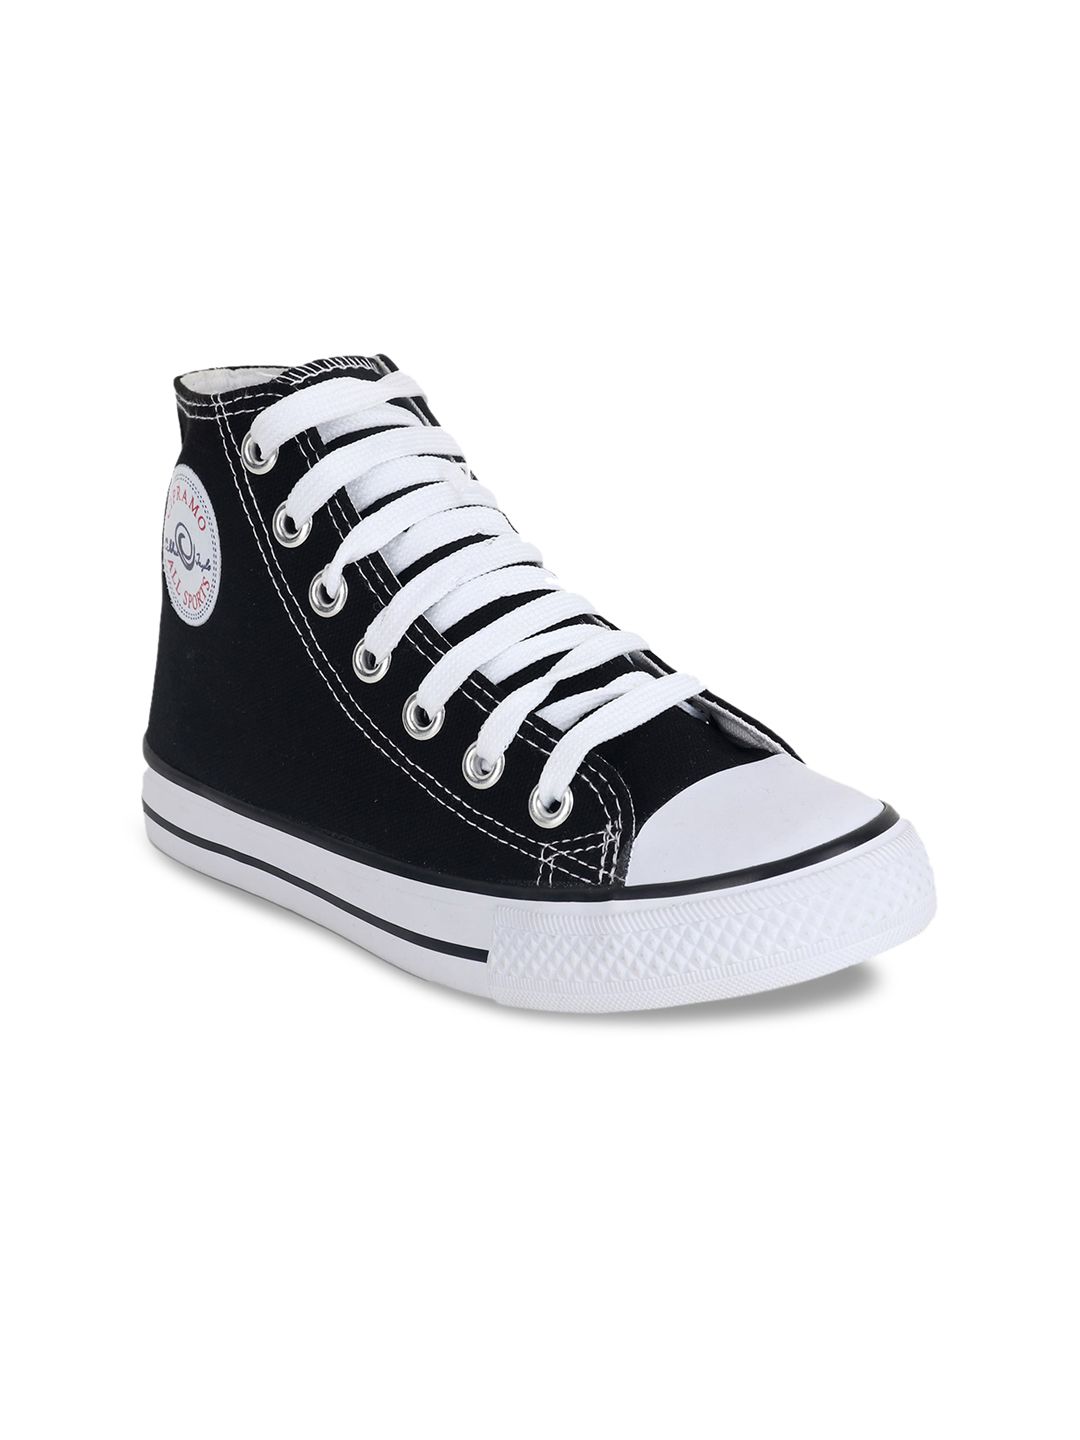 CIPRAMO SPORTS Women Navy Blue Solid High-Top Sneakers Price in India